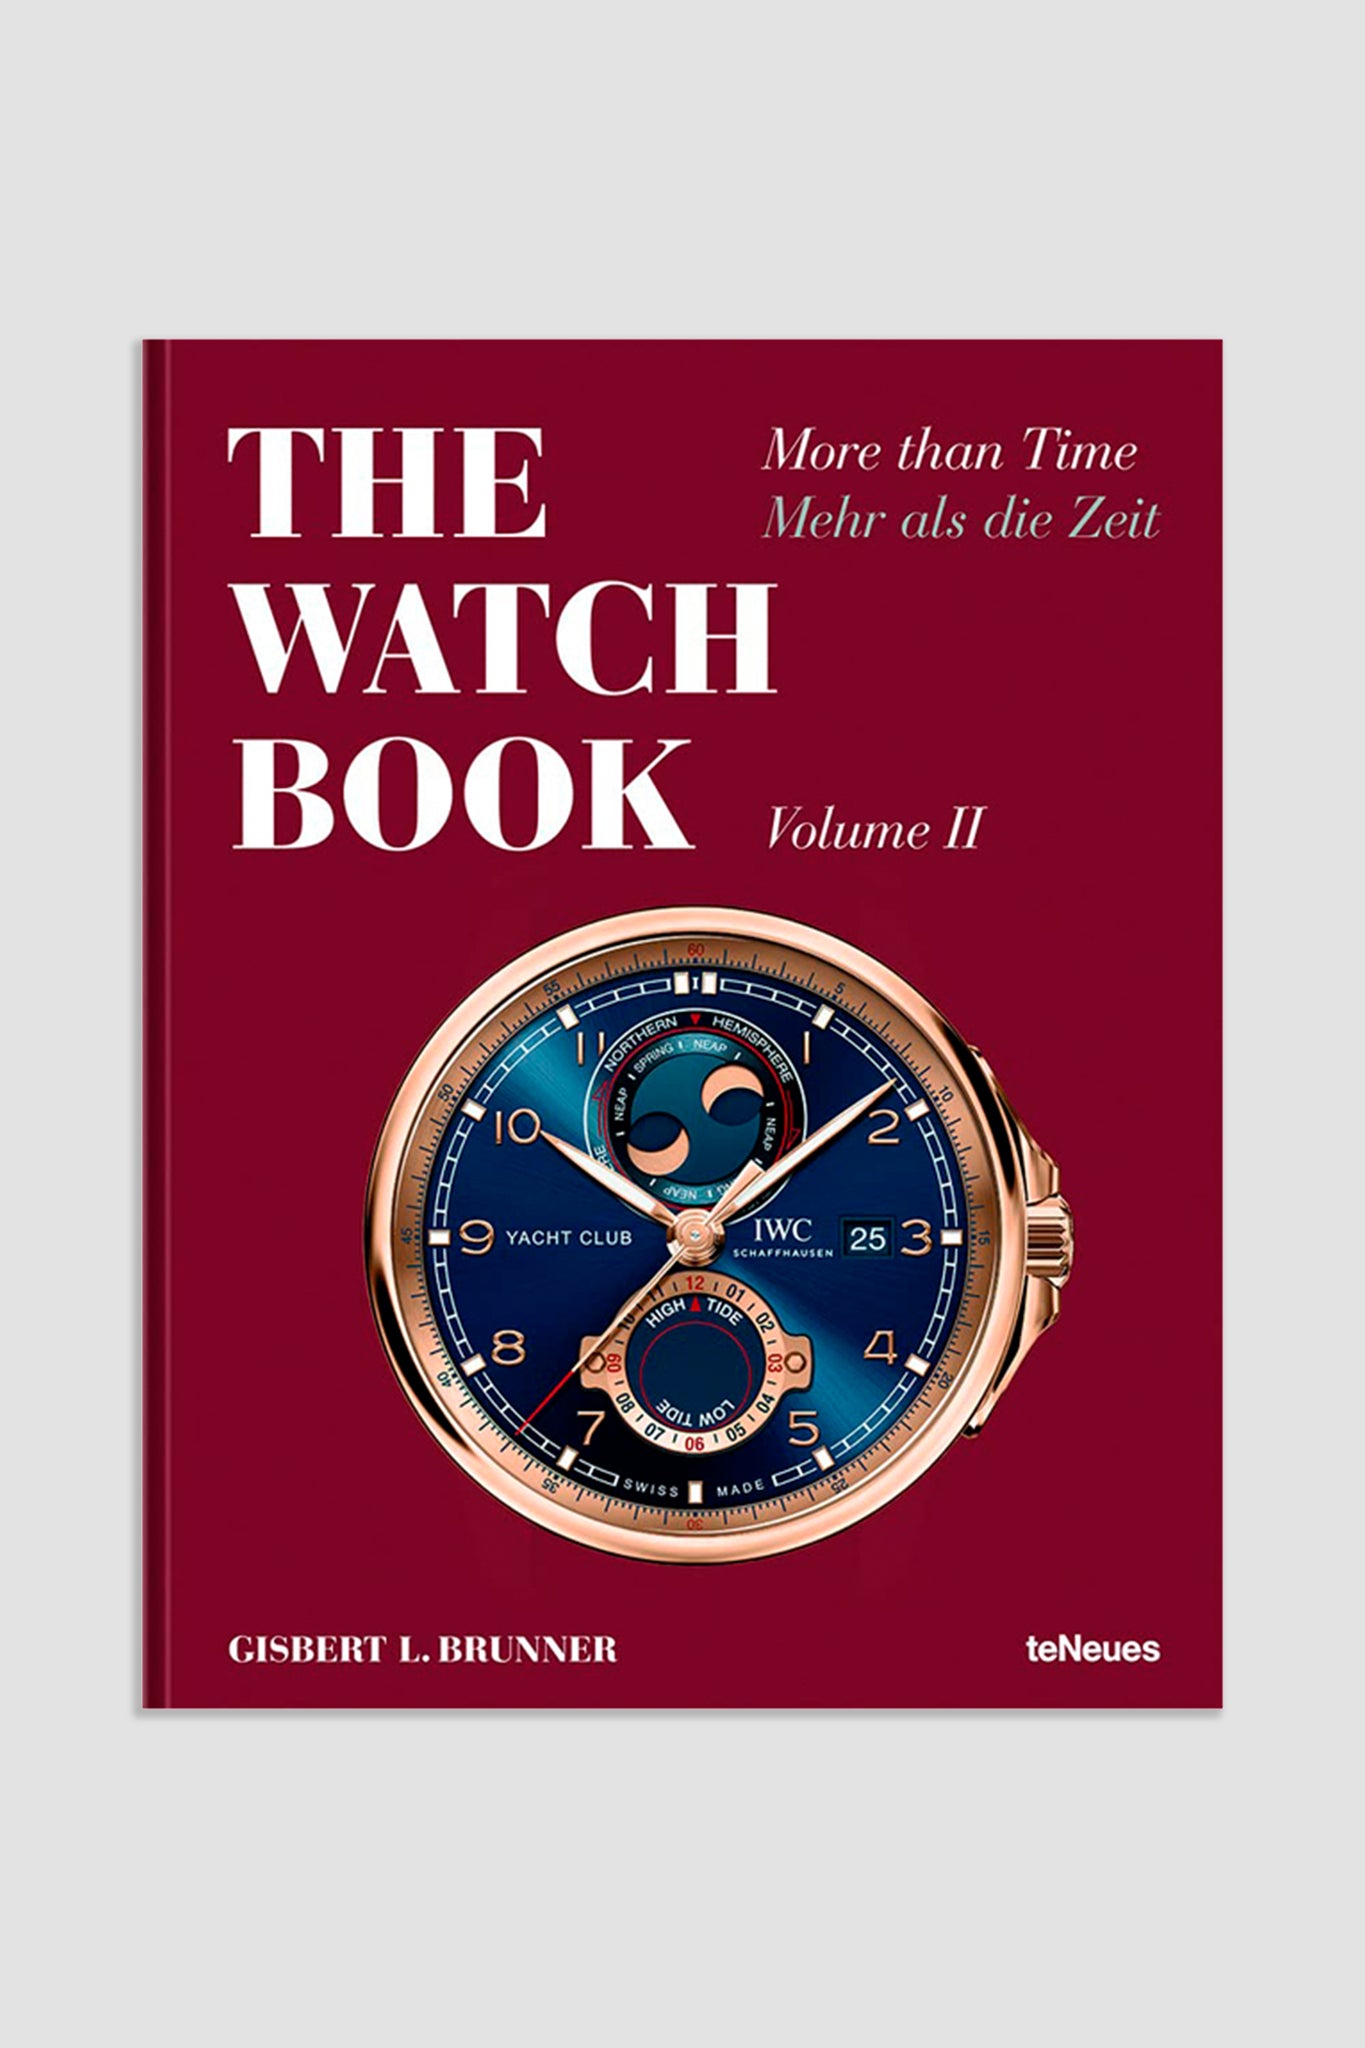 The Watch Book Vol. II: More Than Time by Gisbert L. Brunner